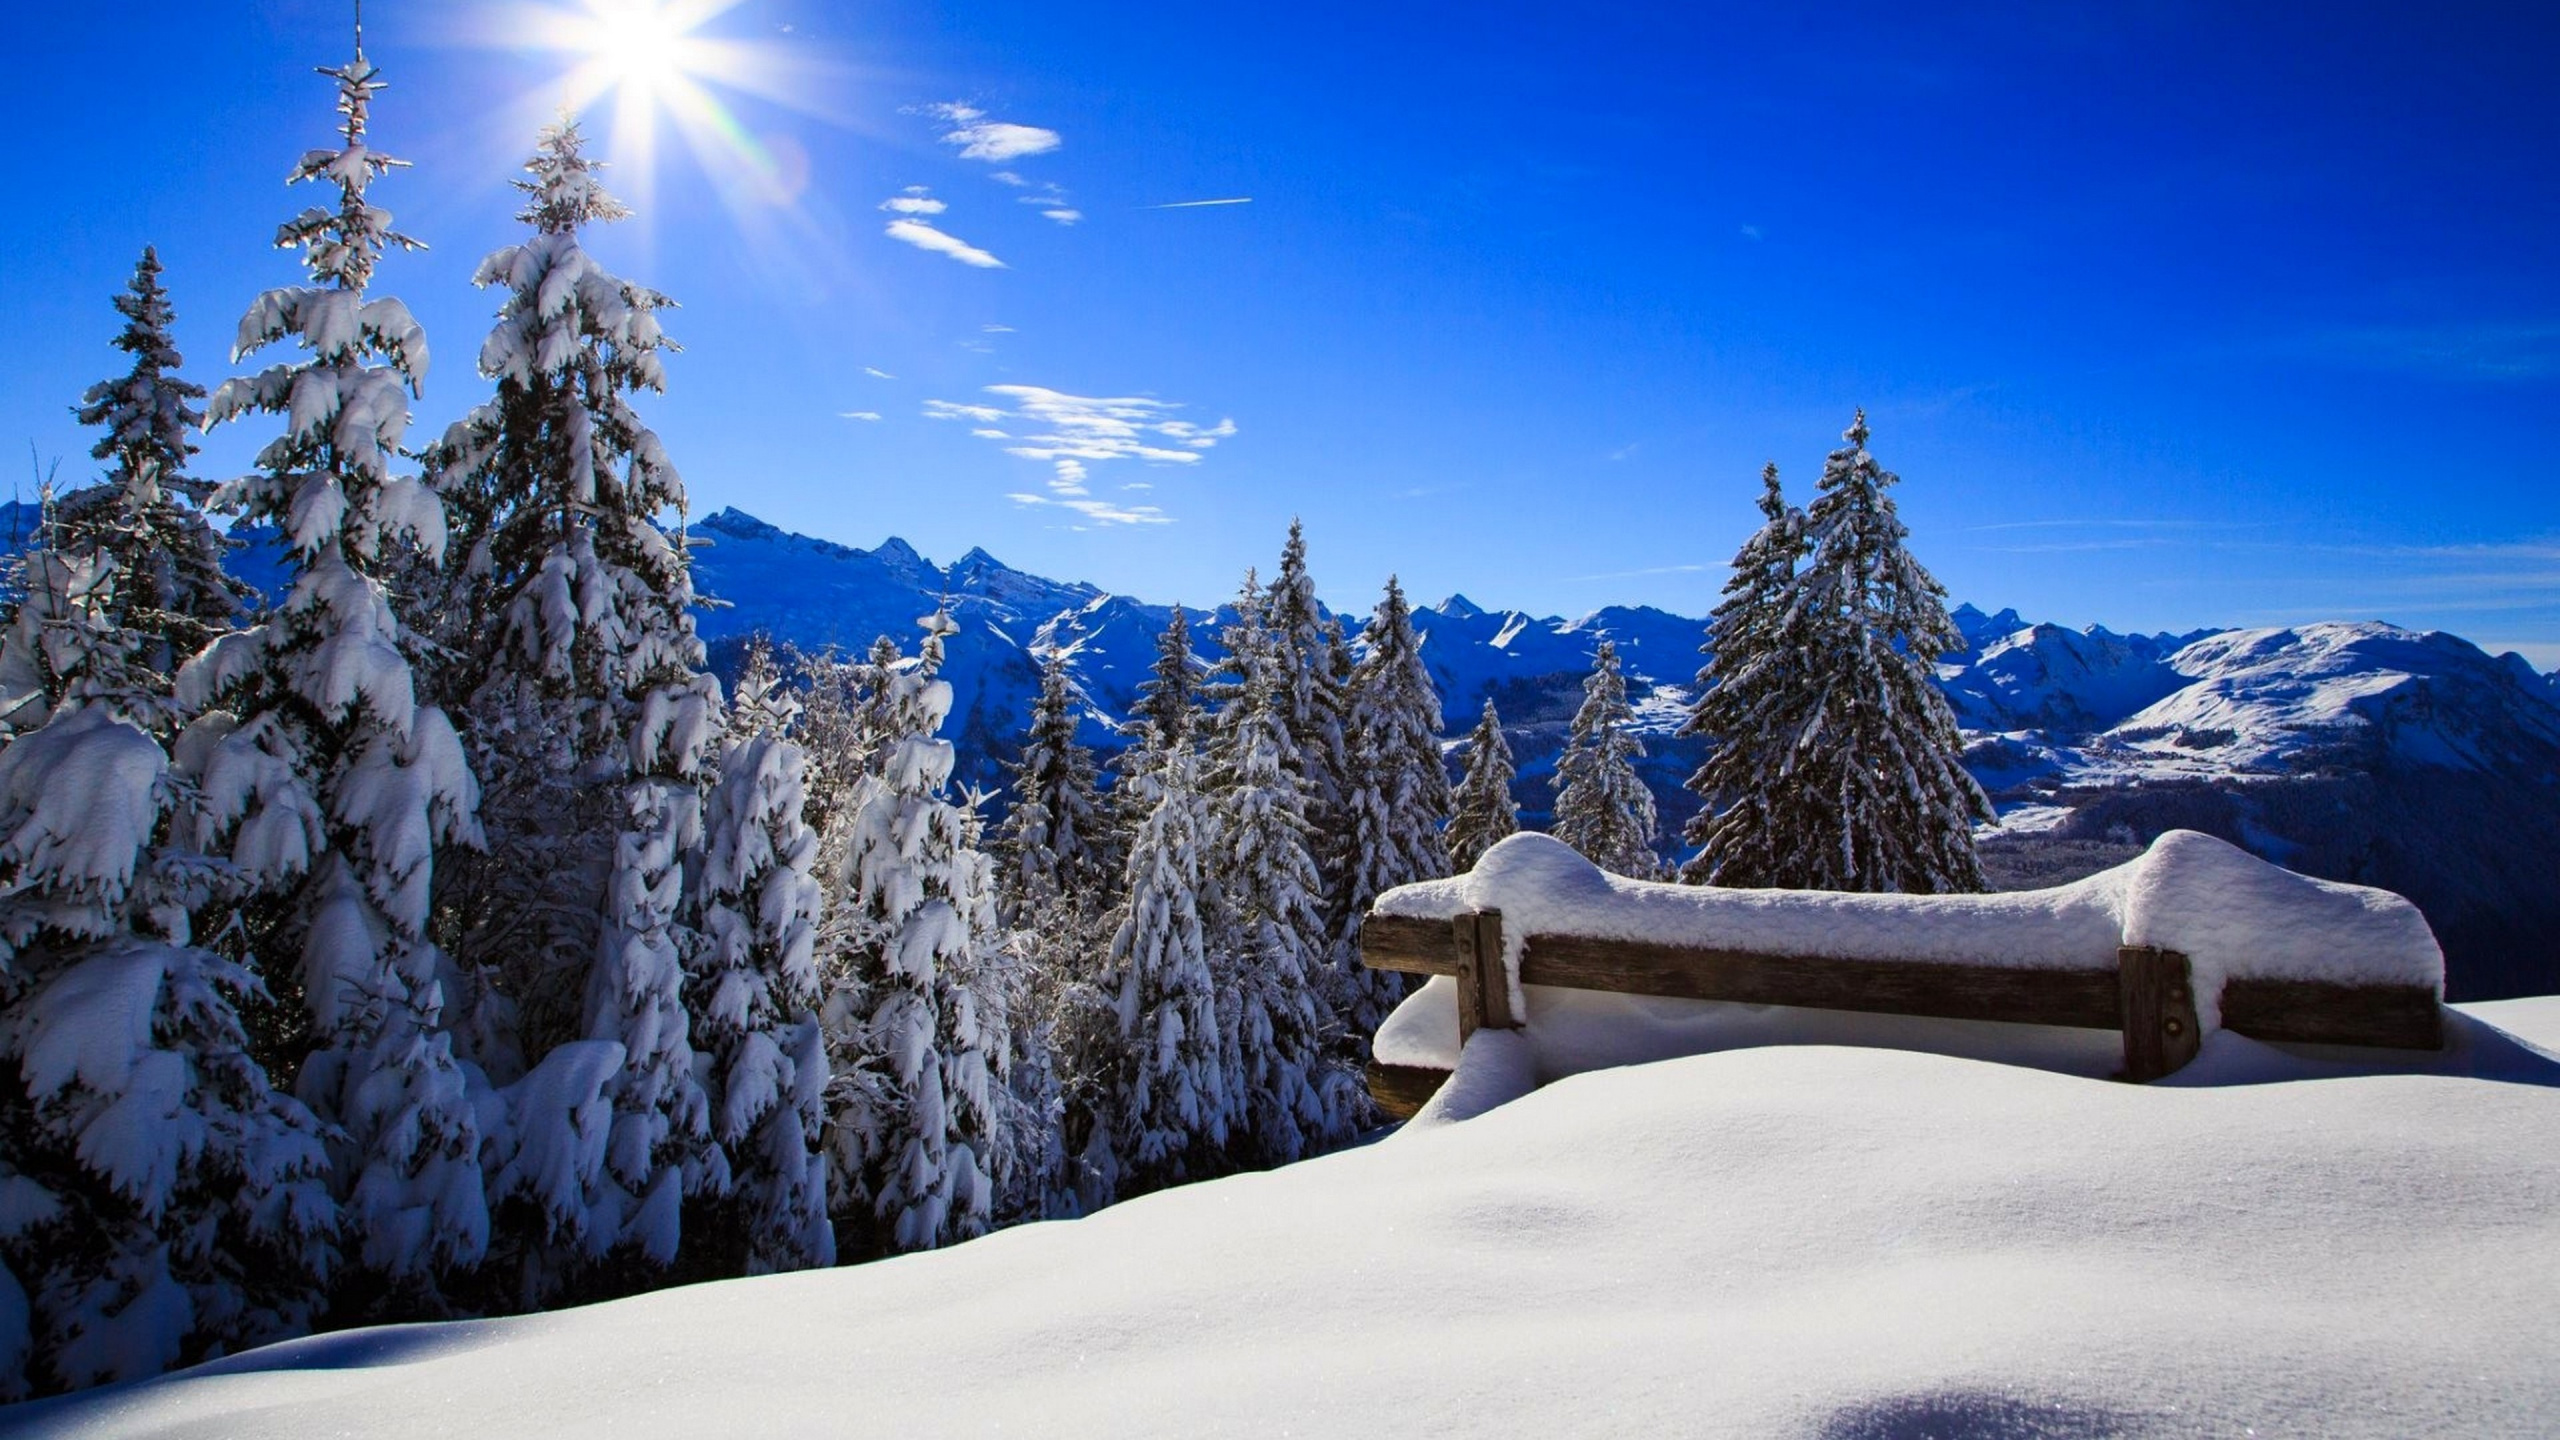 Snow Covered Trees and Mountains During Daytime. Wallpaper in 2560x1440 Resolution